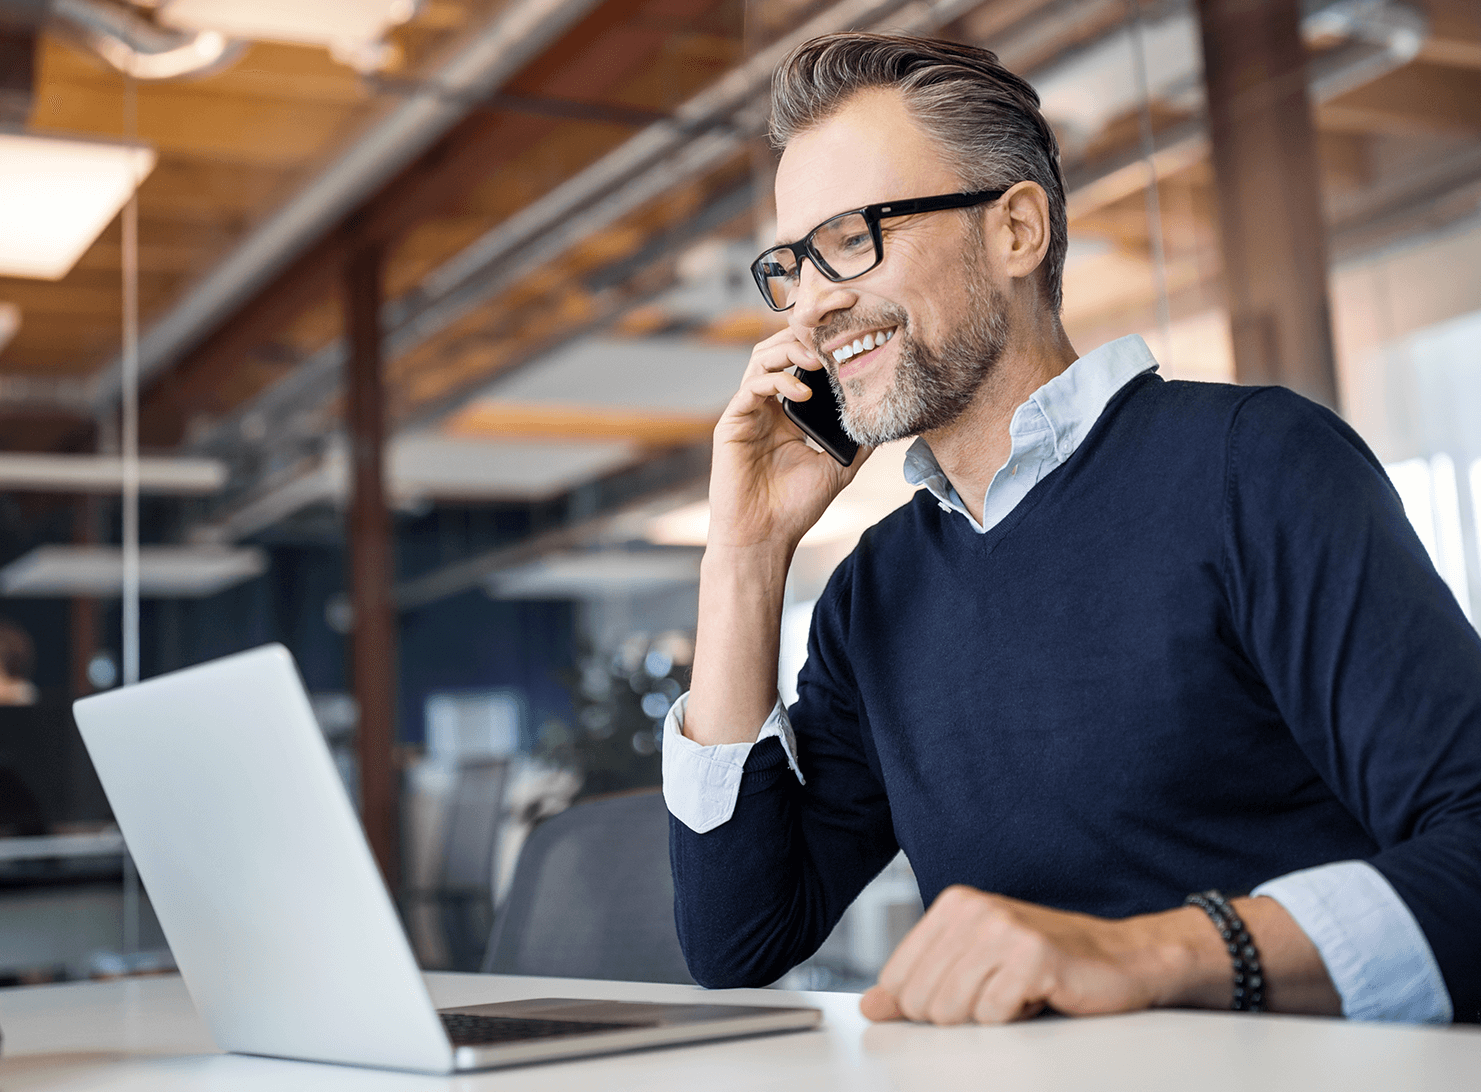 middleaged business man in sweater talking on cell phone while looking at laptop